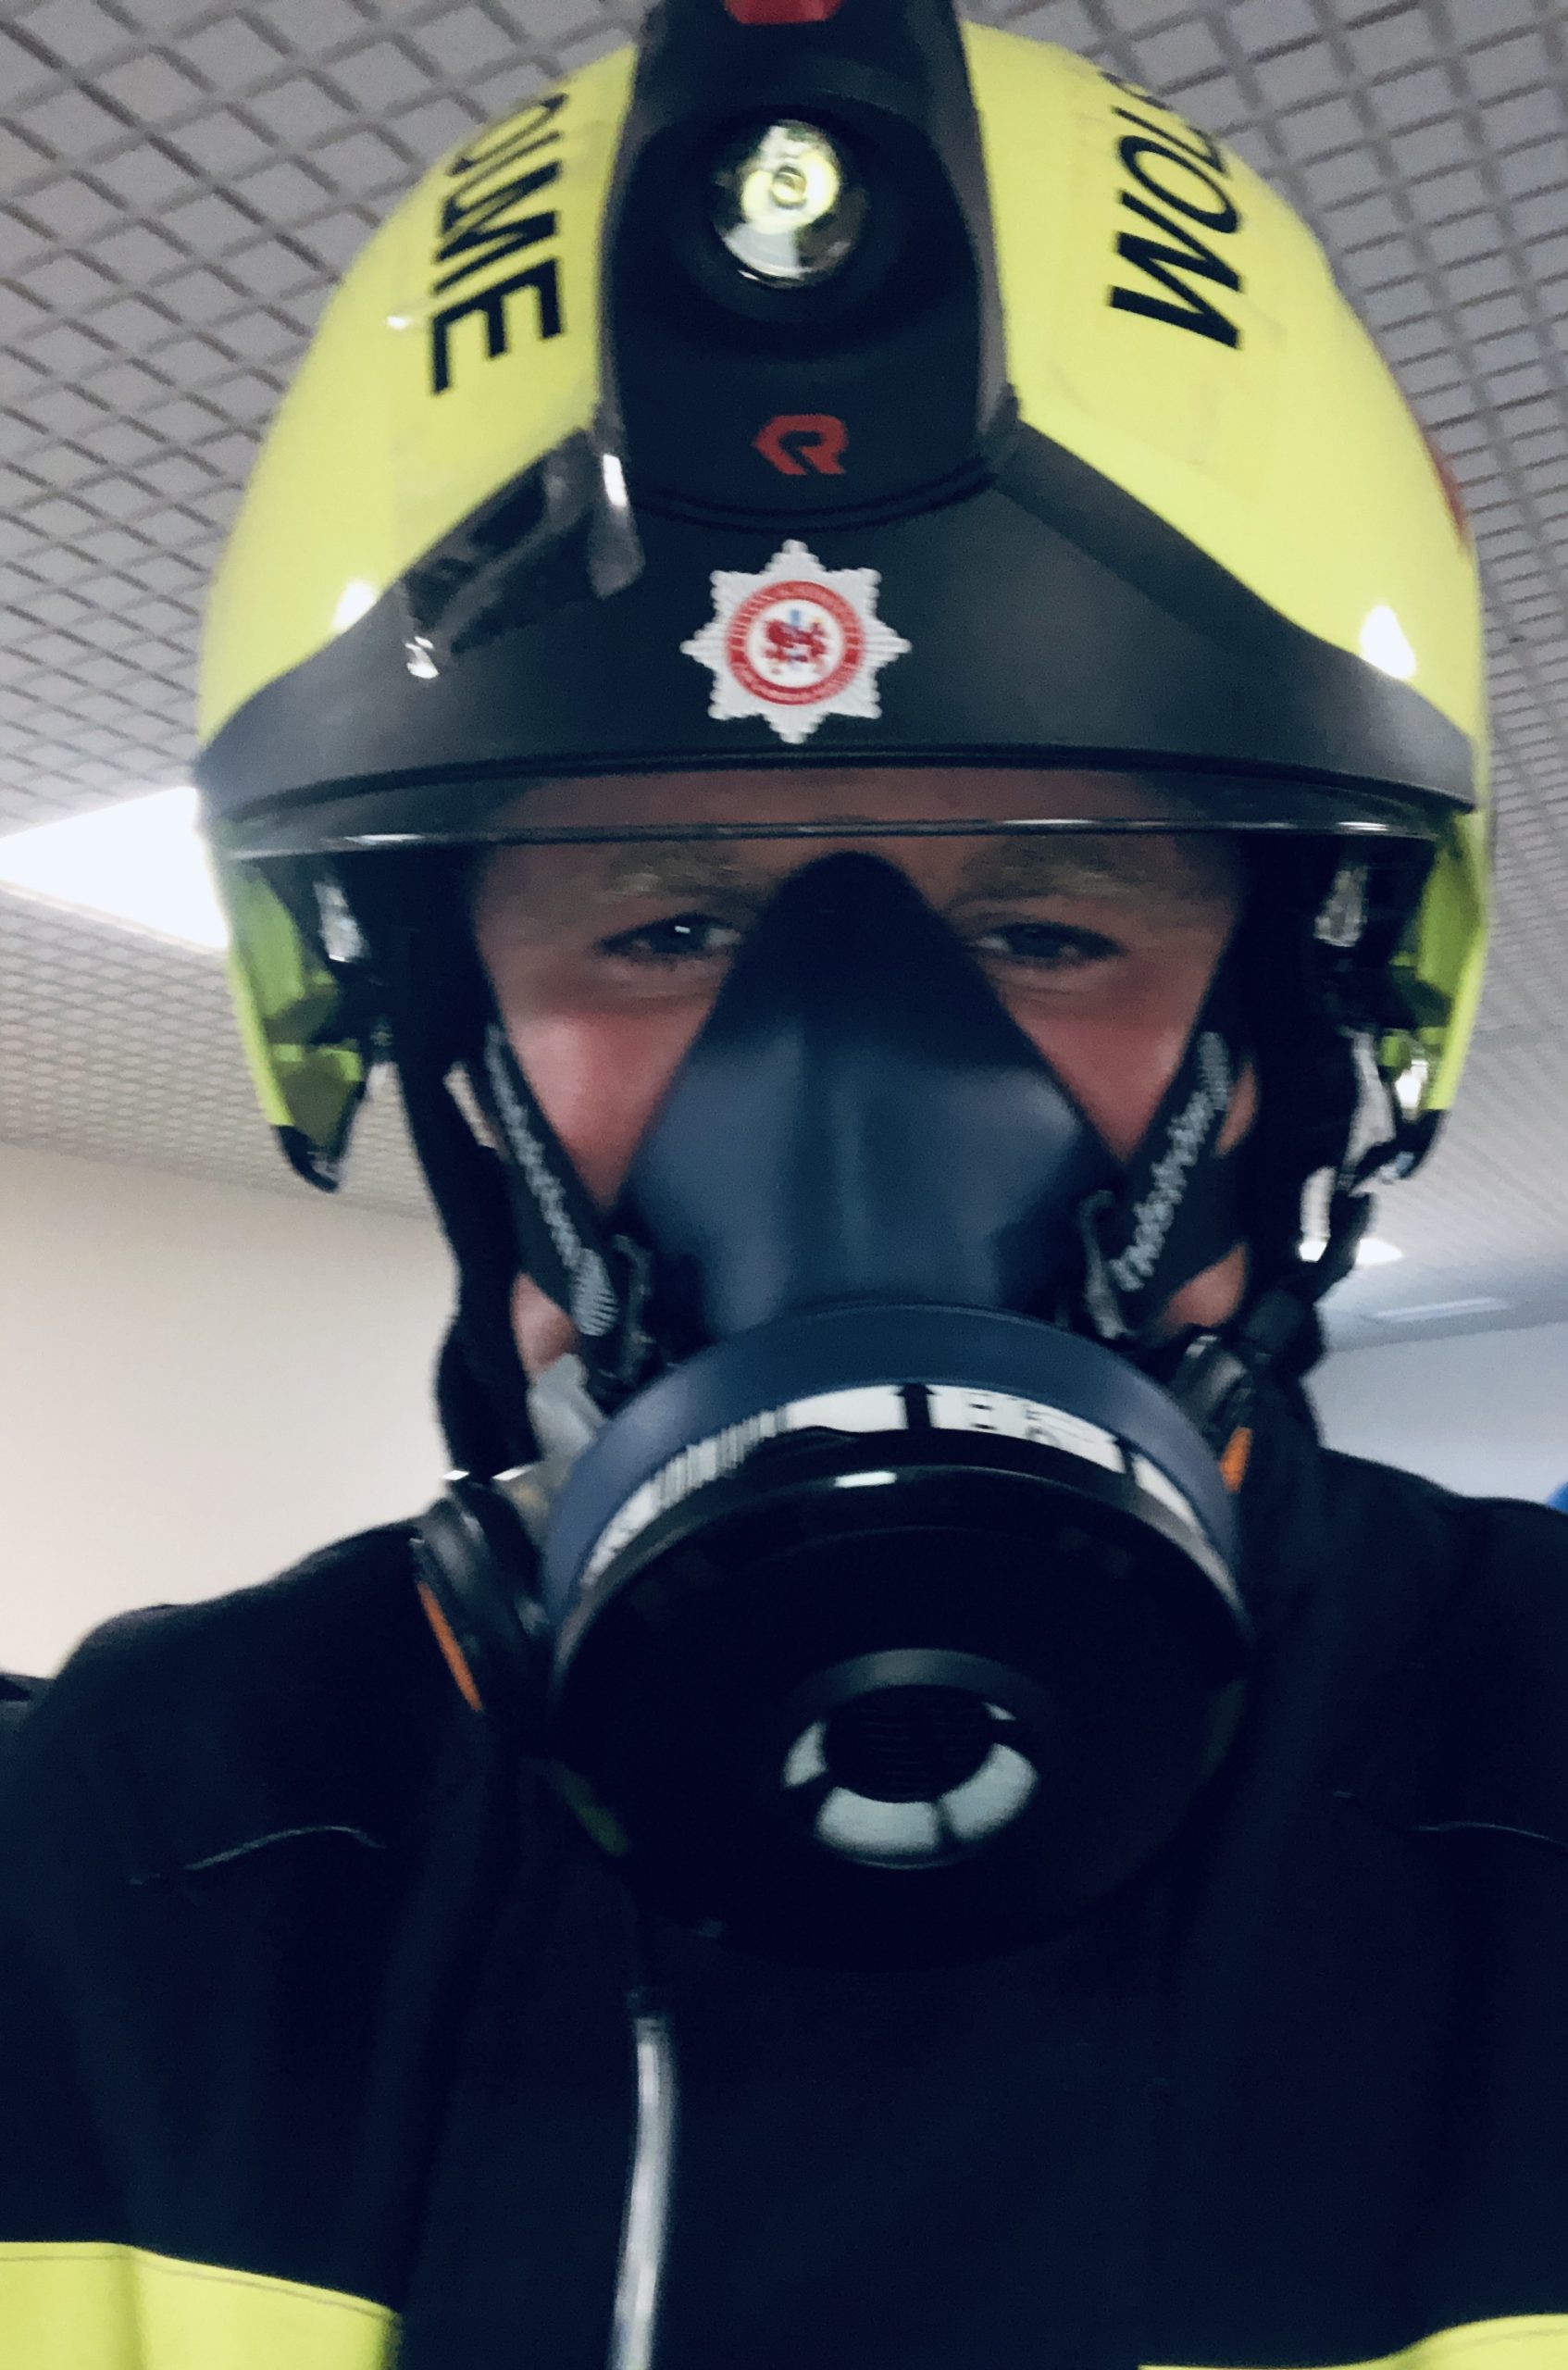 Business Development Manager becomes firefighter